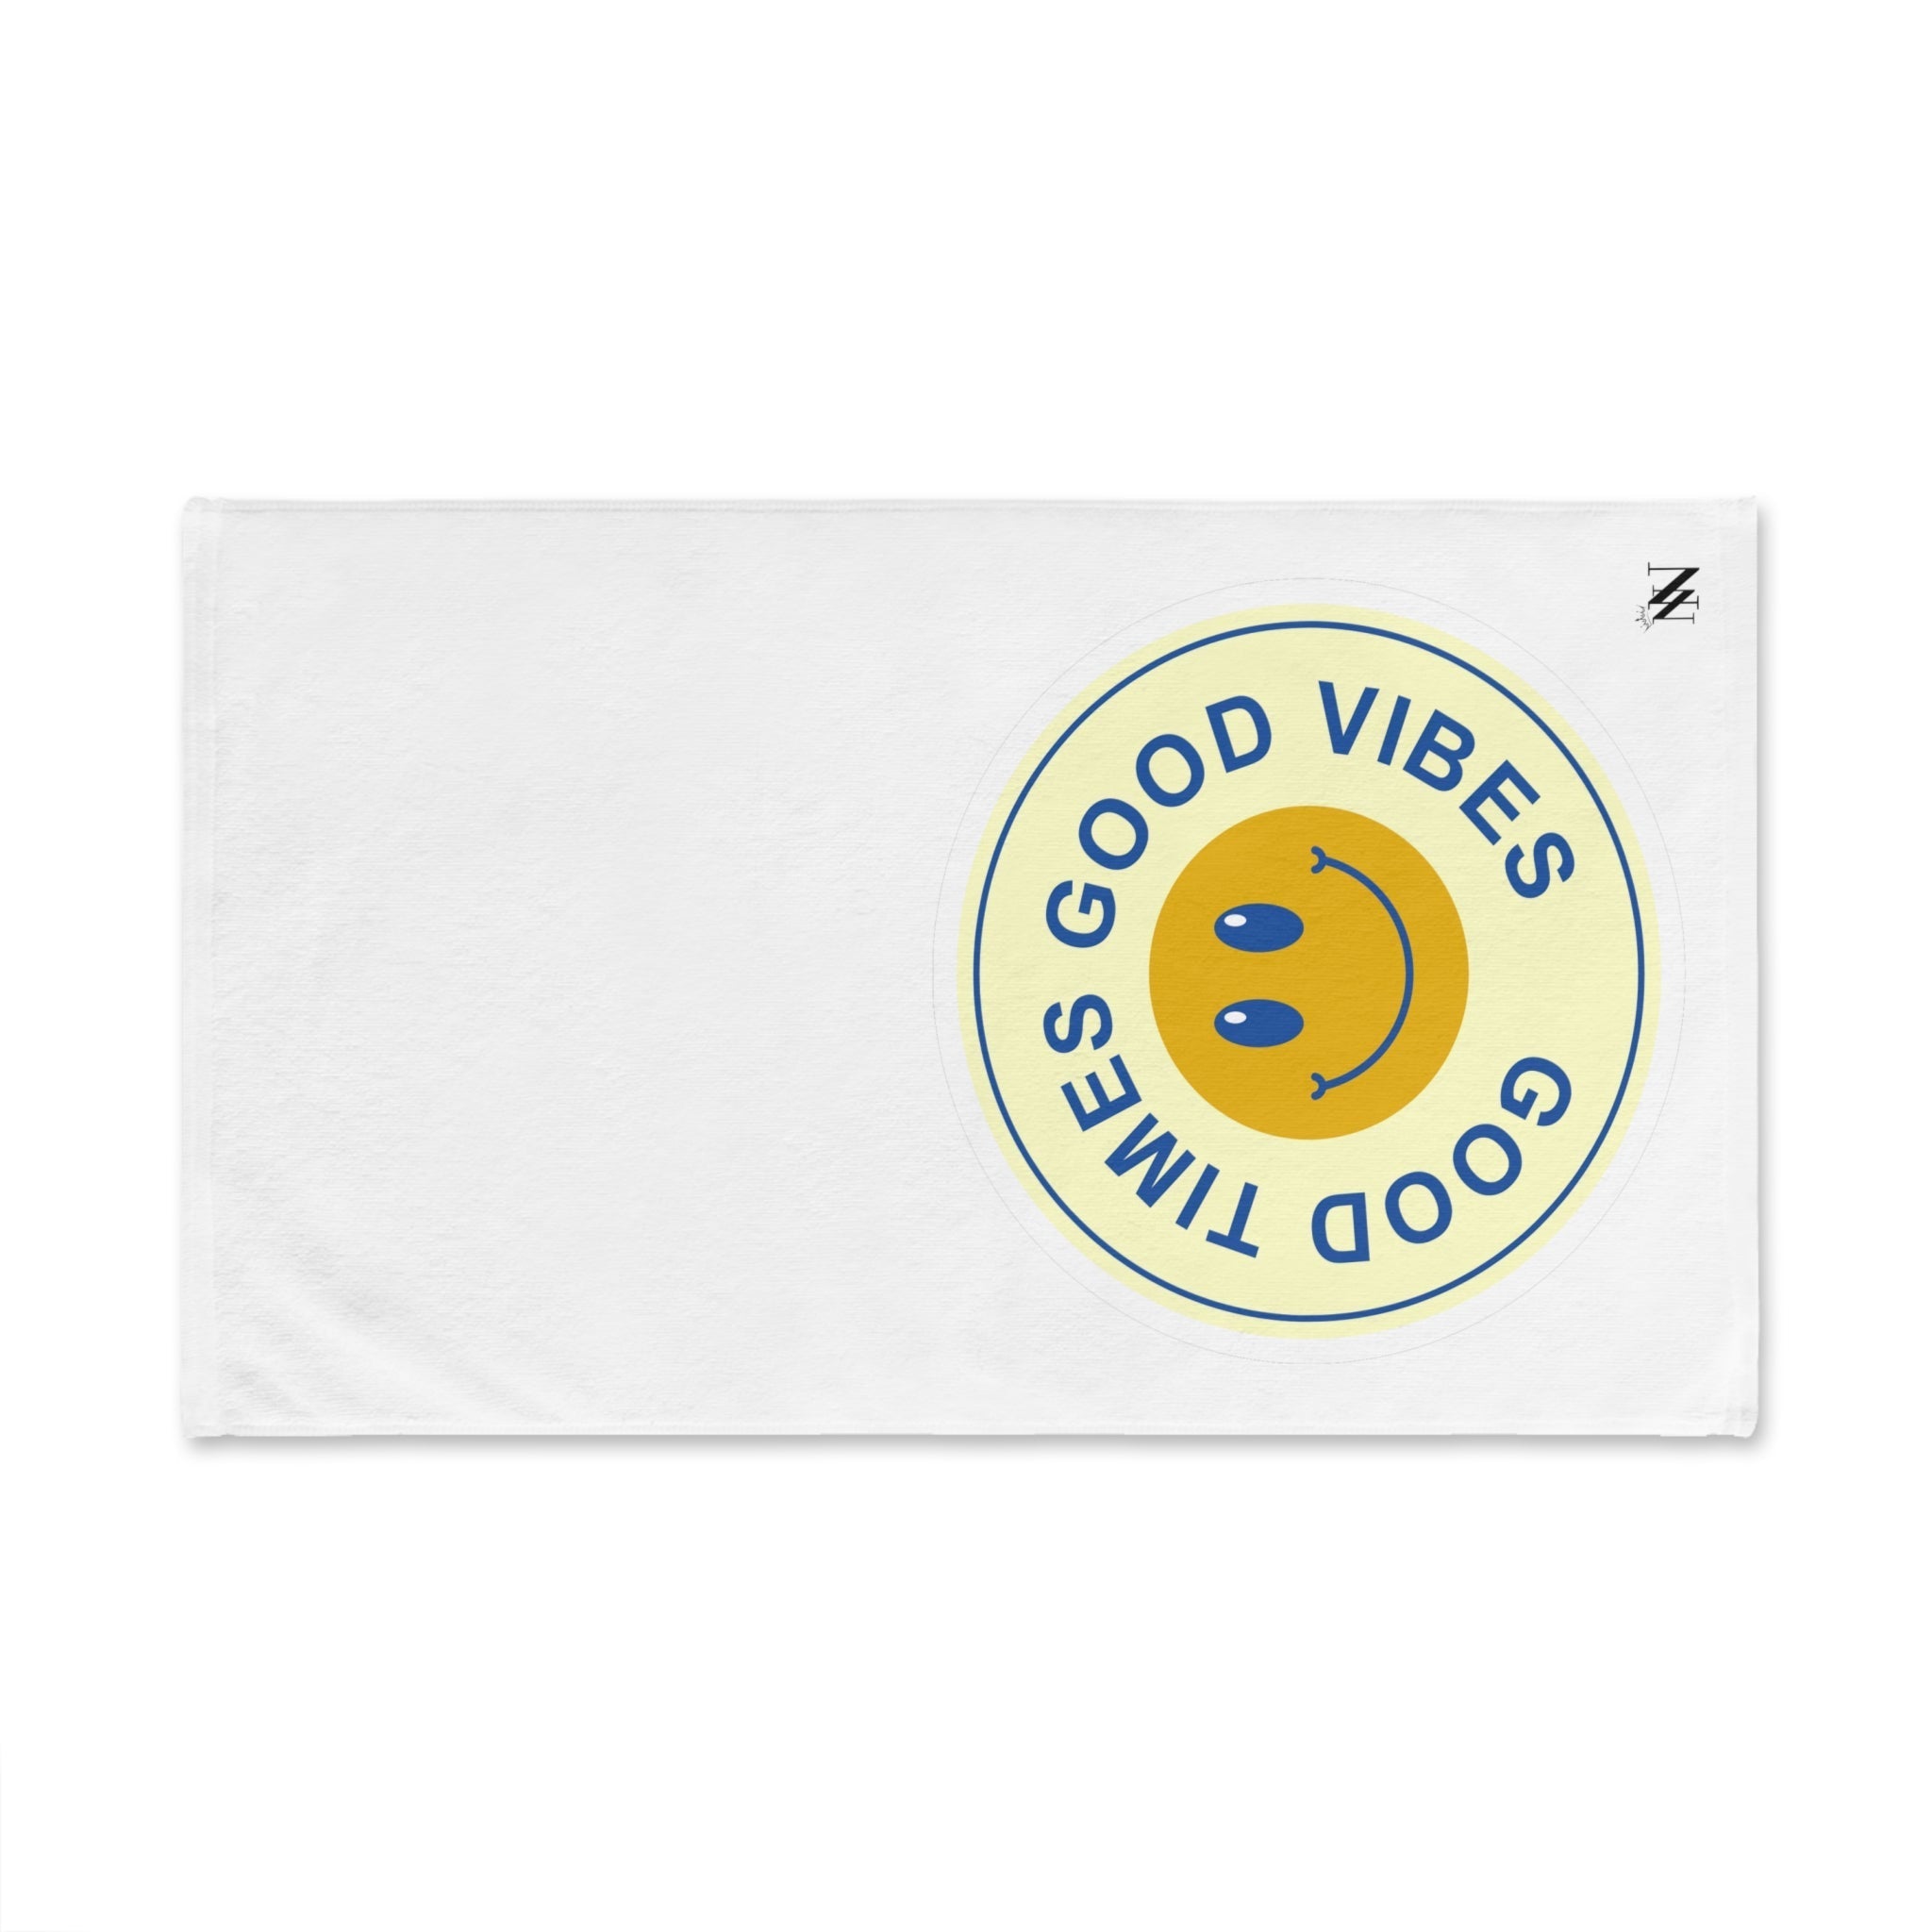 Times Good  SmileWhite | Funny Gifts for Men - Gifts for Him - Birthday Gifts for Men, Him, Her, Husband, Boyfriend, Girlfriend, New Couple Gifts, Fathers & Valentines Day Gifts, Christmas Gifts NECTAR NAPKINS